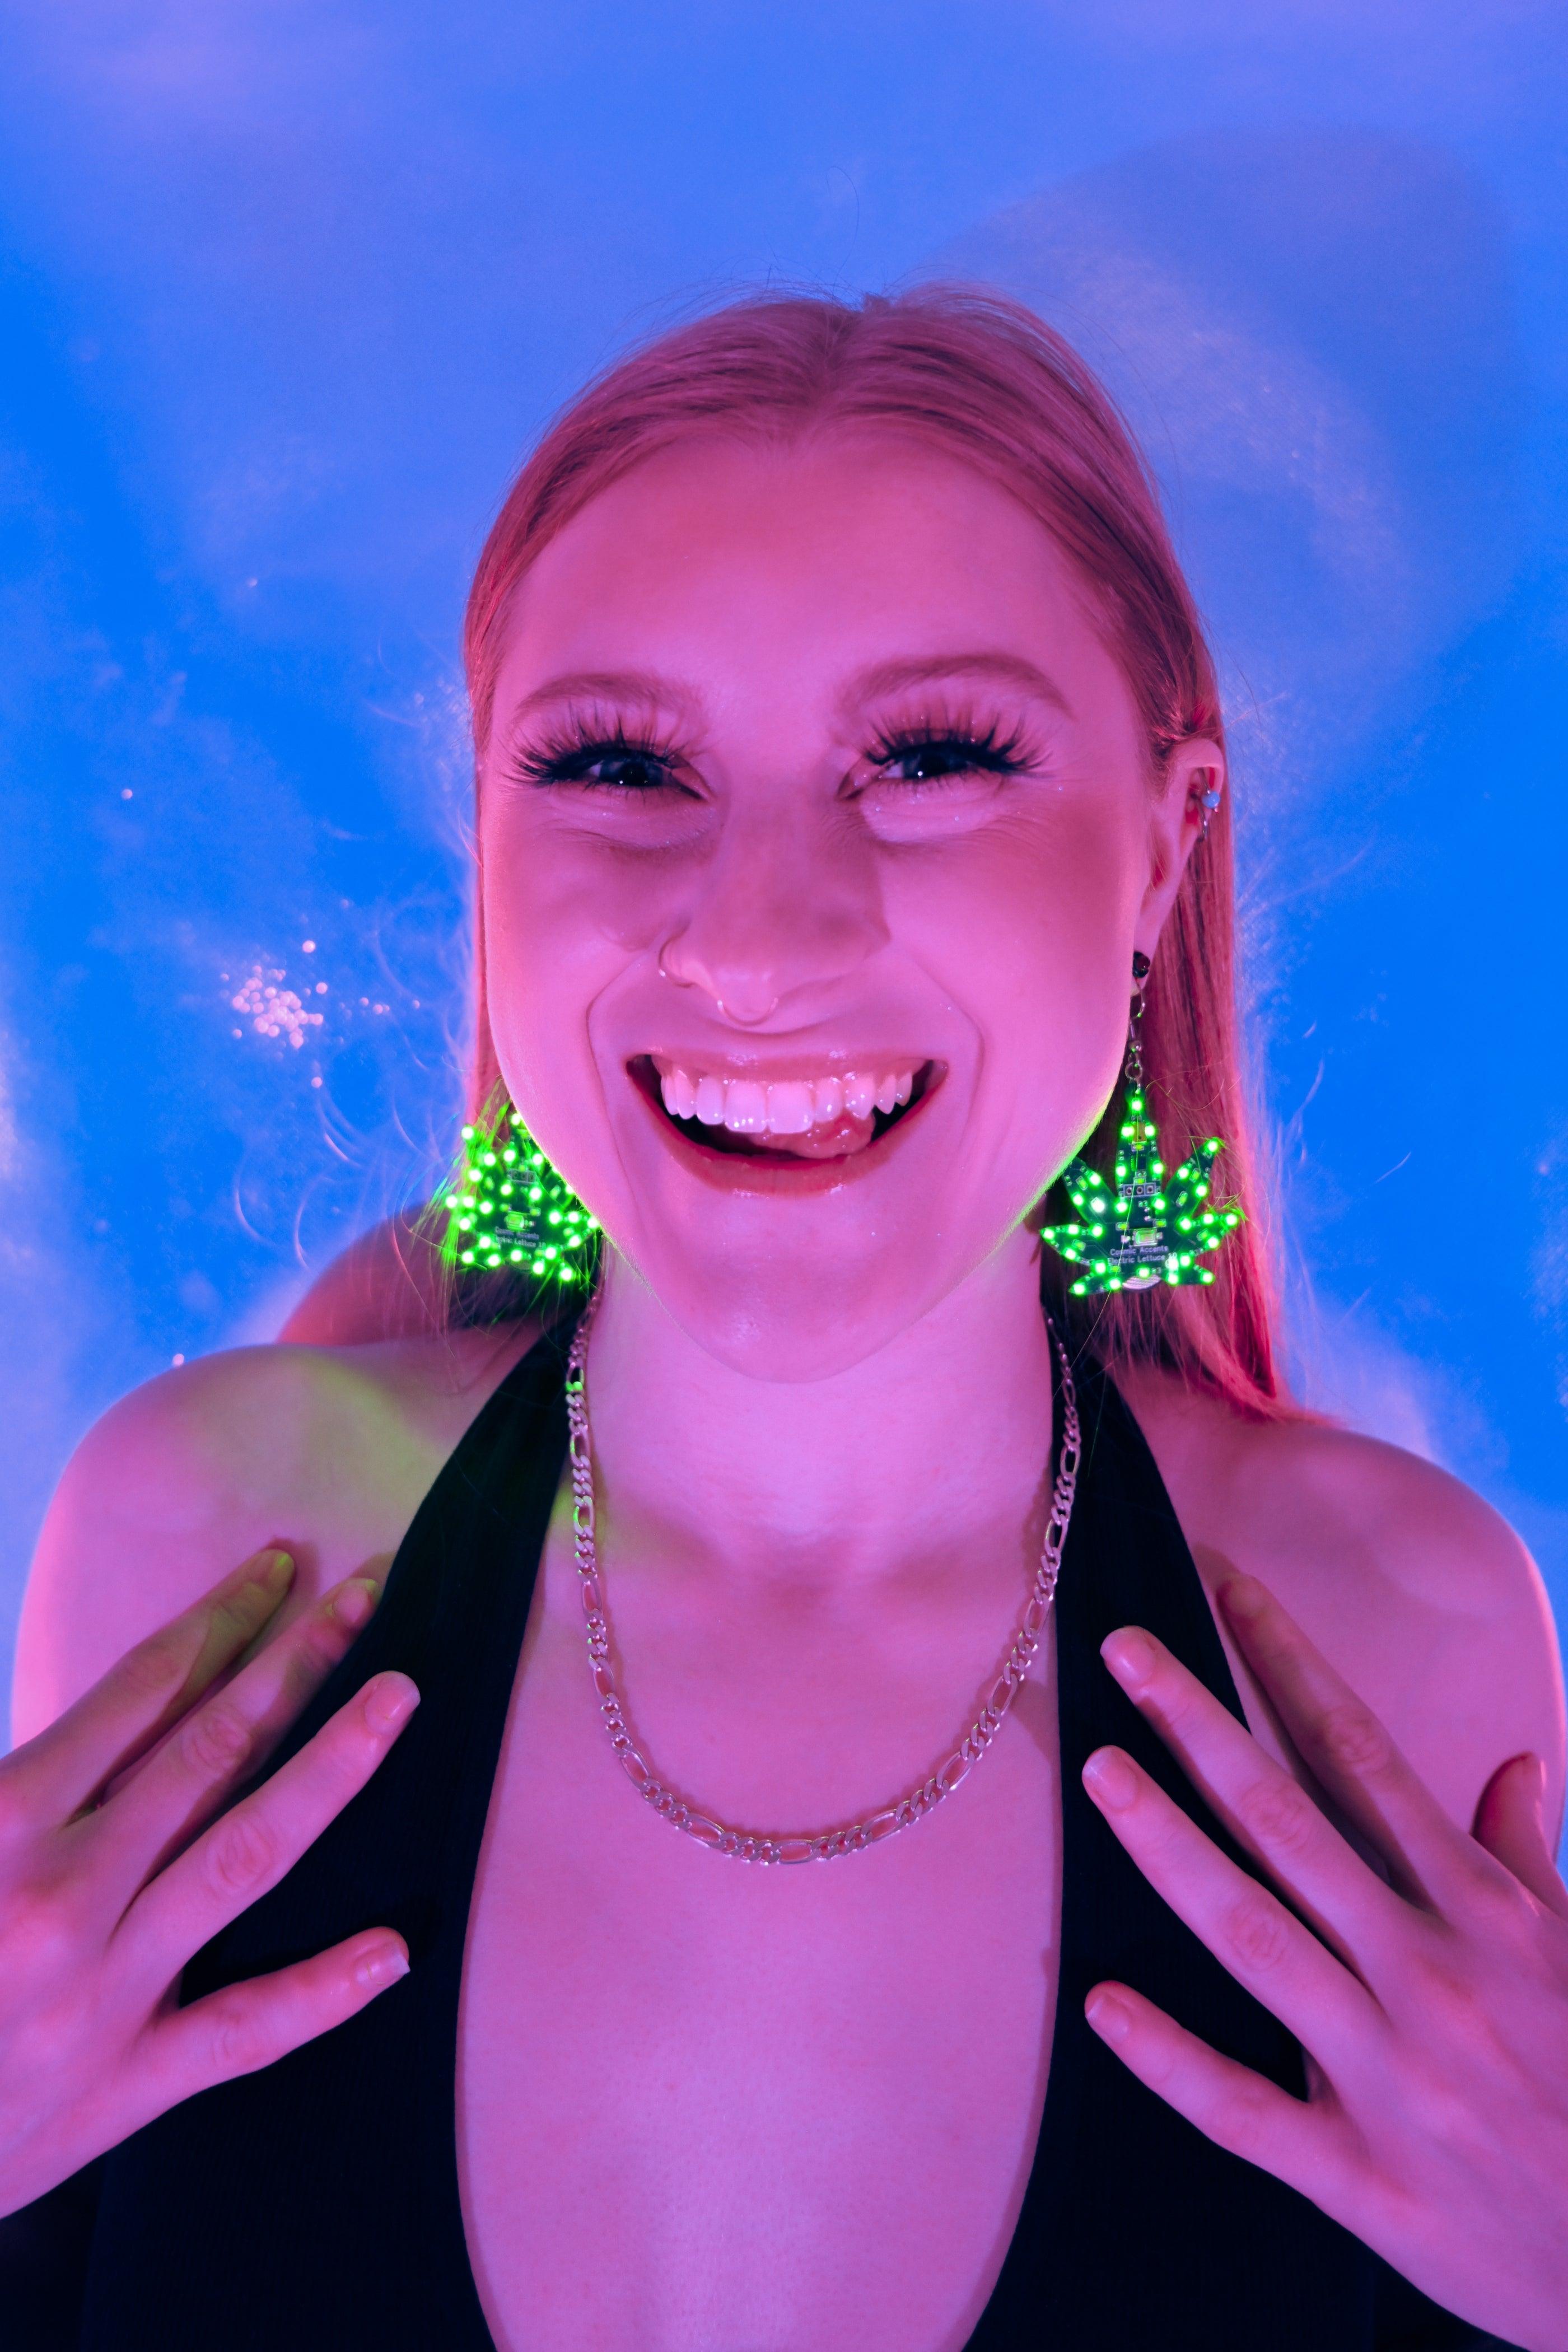 Electric Lettuce (Sound Reactive, Green Weed Leaf LED Earrings)